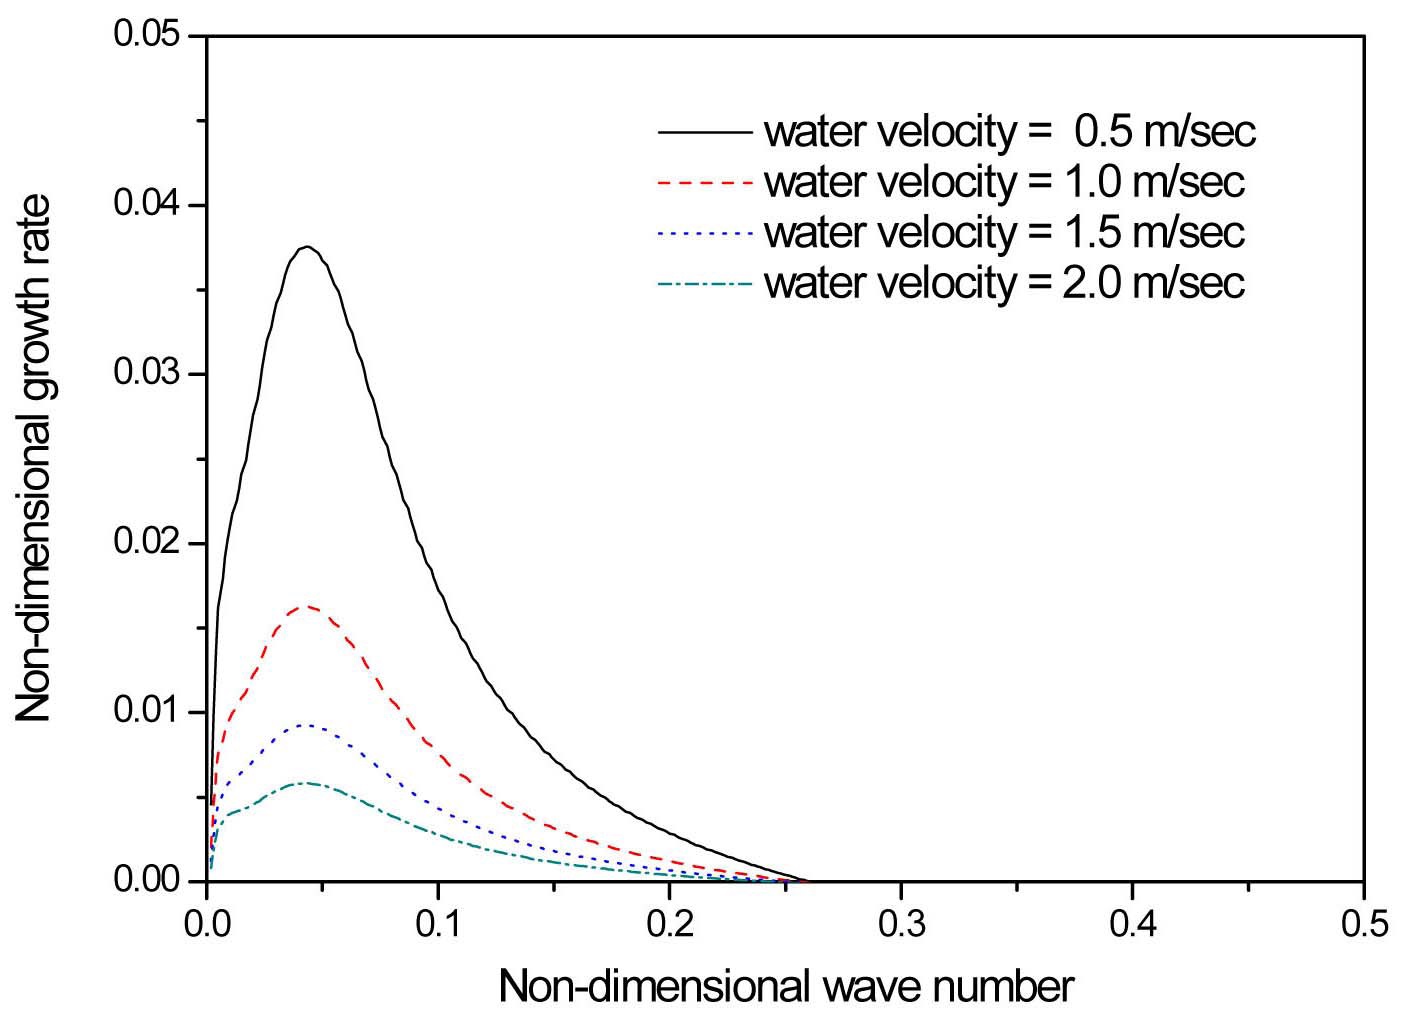 Non-dimensional Temporal Growth rate as a Function
of Non-dimensional Wavenumber for P=0.15 MPa, T=400℃,
U2,M=10m/sec, H=0.05mm, δ=0.5mm, and Different Water
Velocities